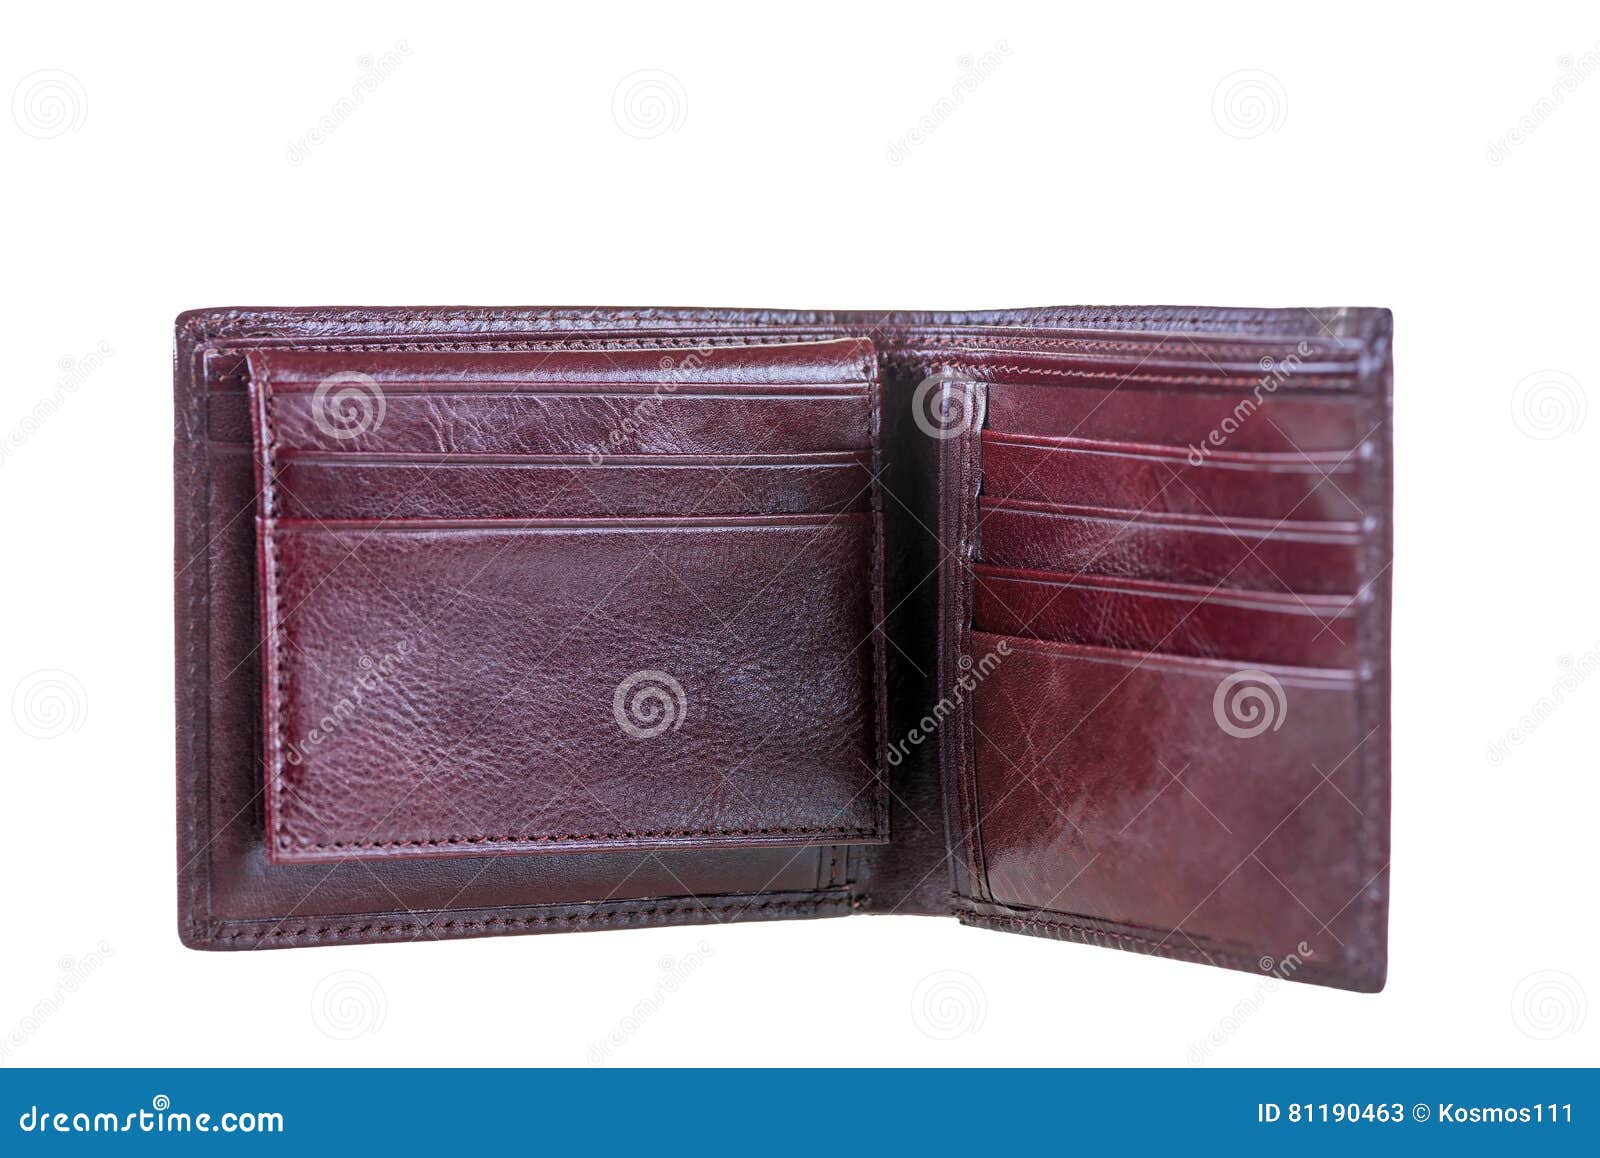 Wallets Made of Genuine Leather Brown Color Stock Image - Image of male ...